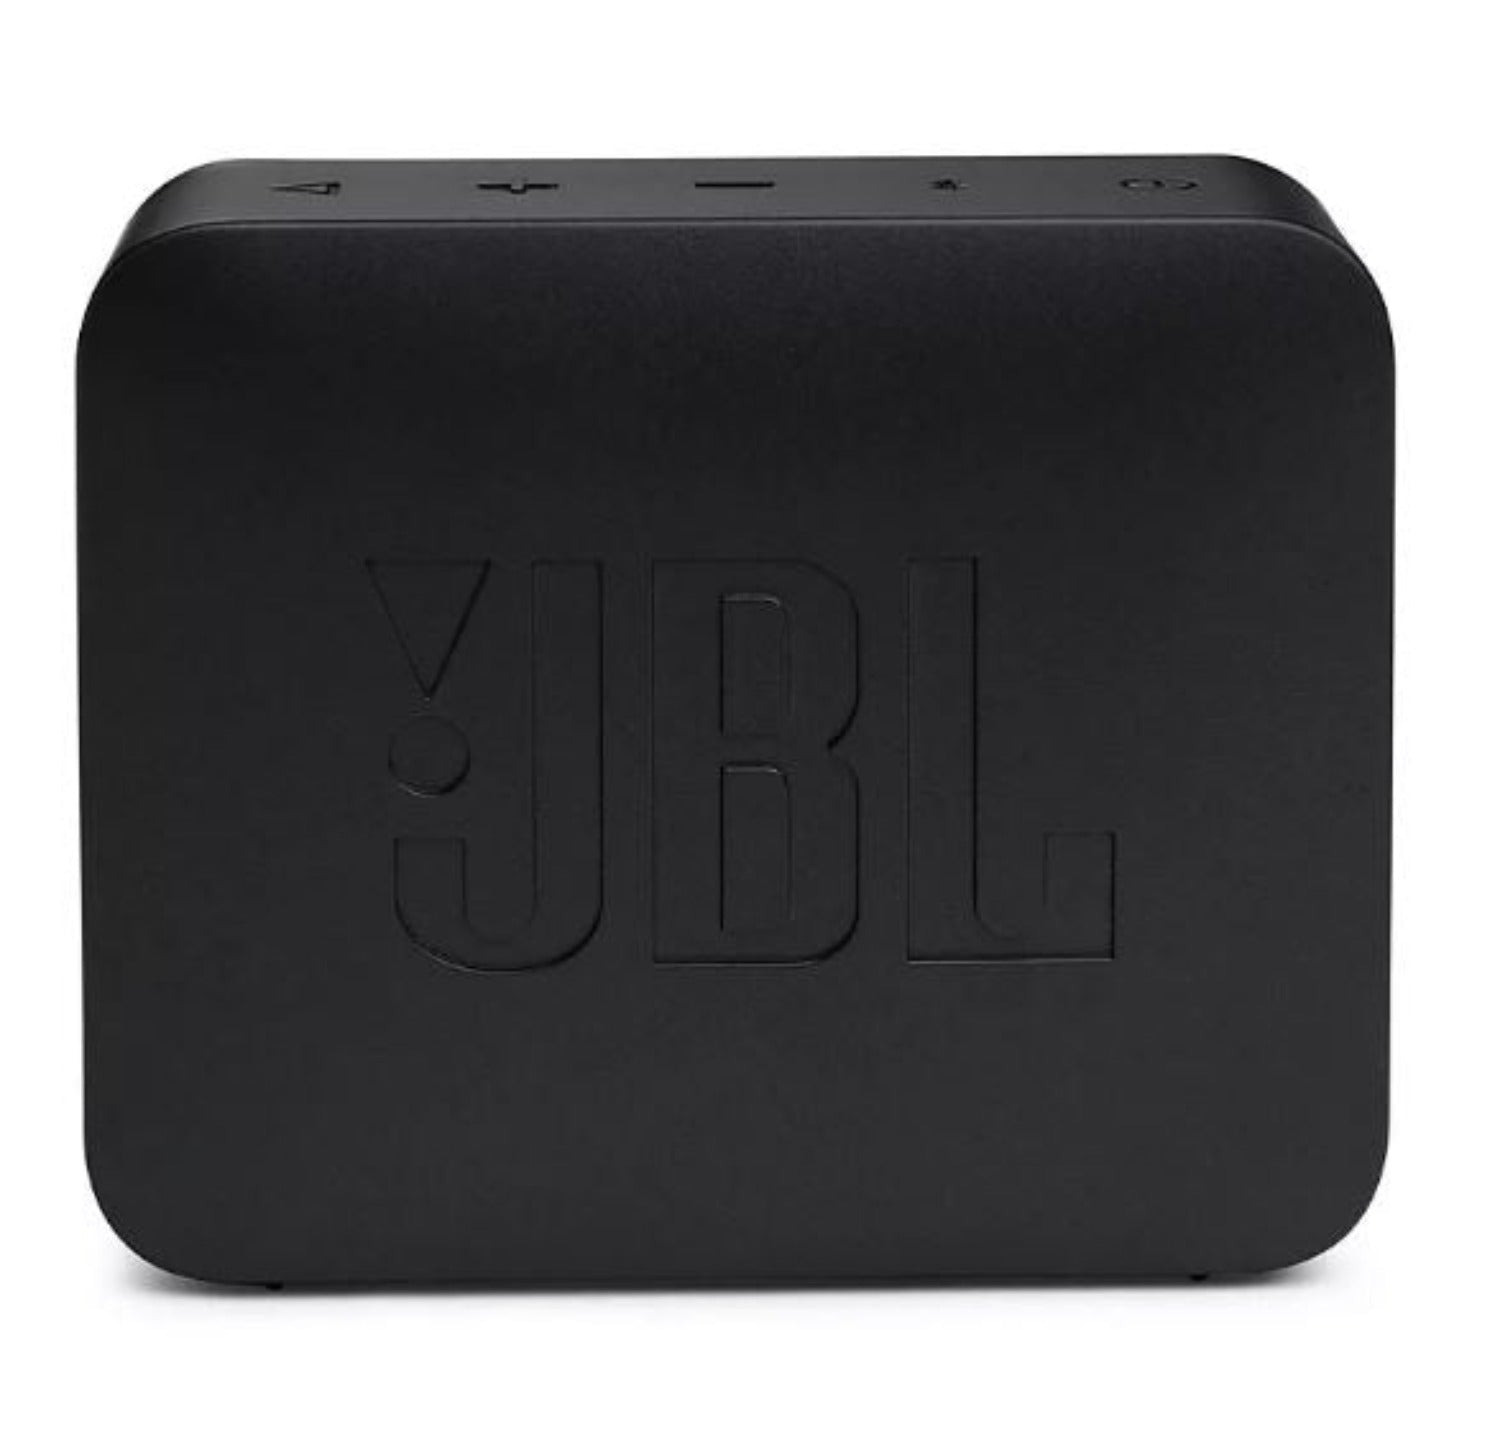  JBL Go 3: Portable Speaker with Bluetooth, Built-in Battery,  Waterproof and Dustproof Feature - Black : Electrónica